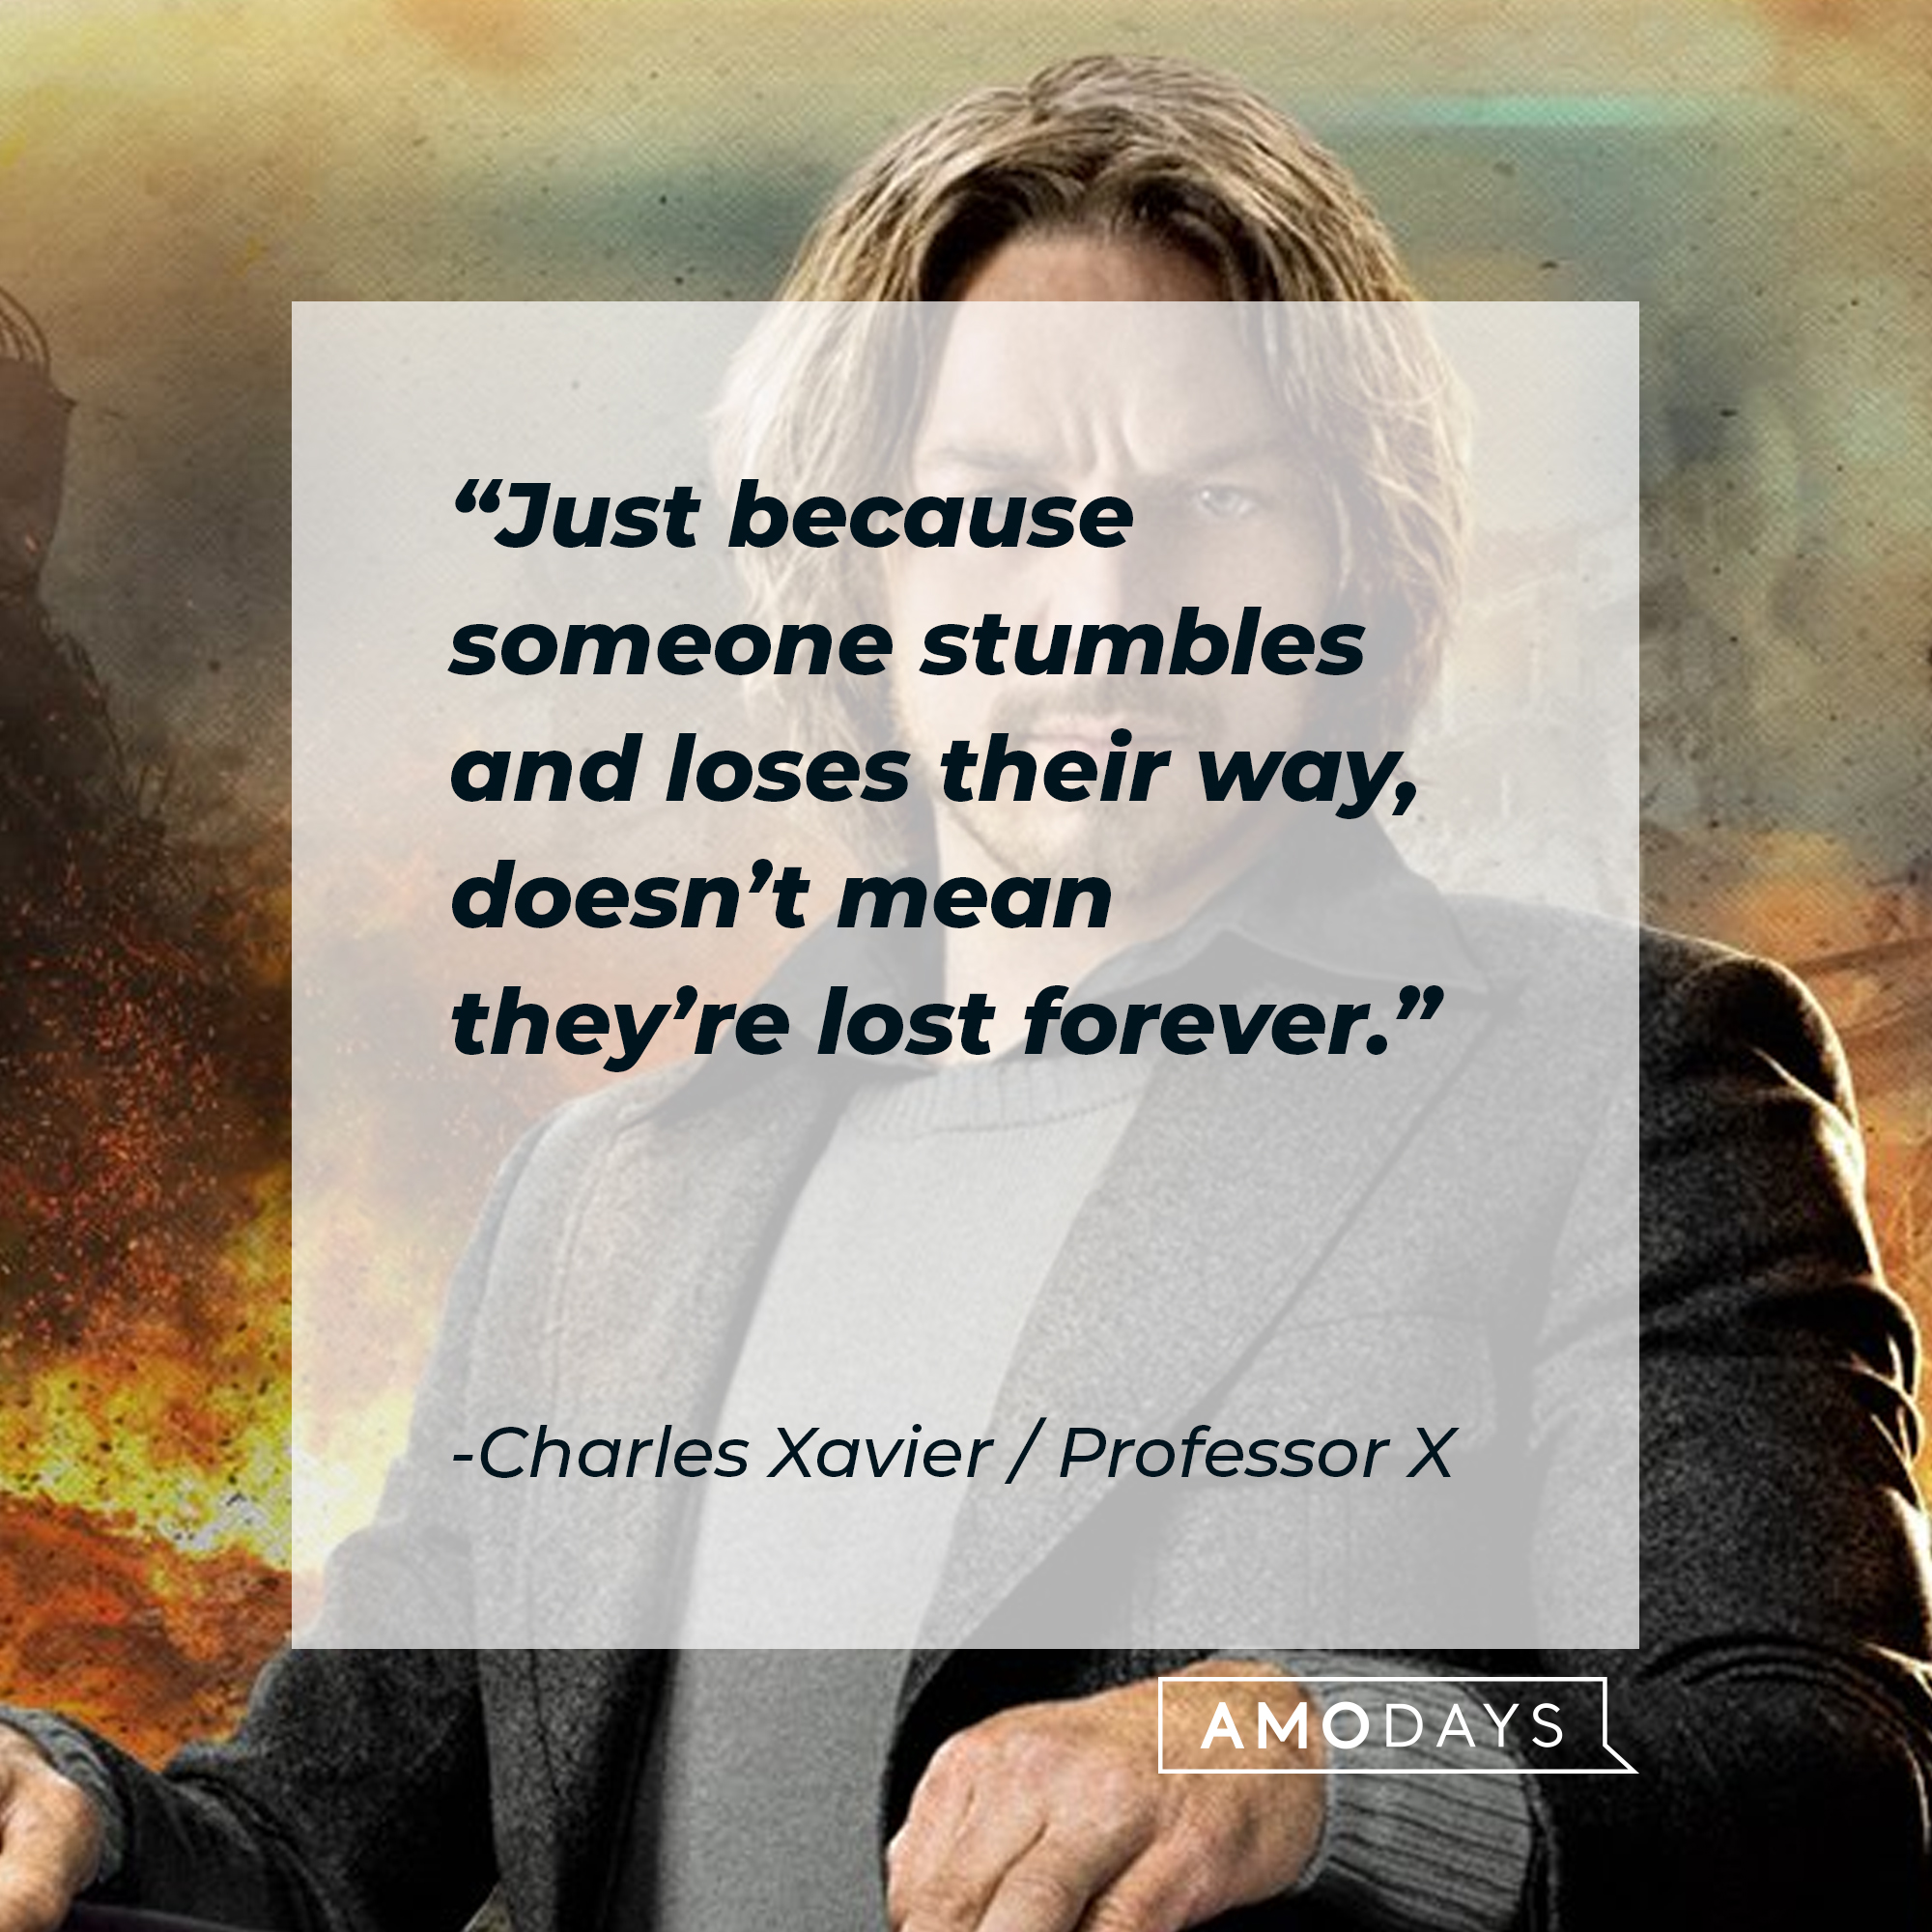 An image of a young Charles Xavier / Professor X, with his quote: "Just because someone stumbles and loses their way, doesn’t mean they’re lost forever." | Source: Facebook.com/xmenmovies